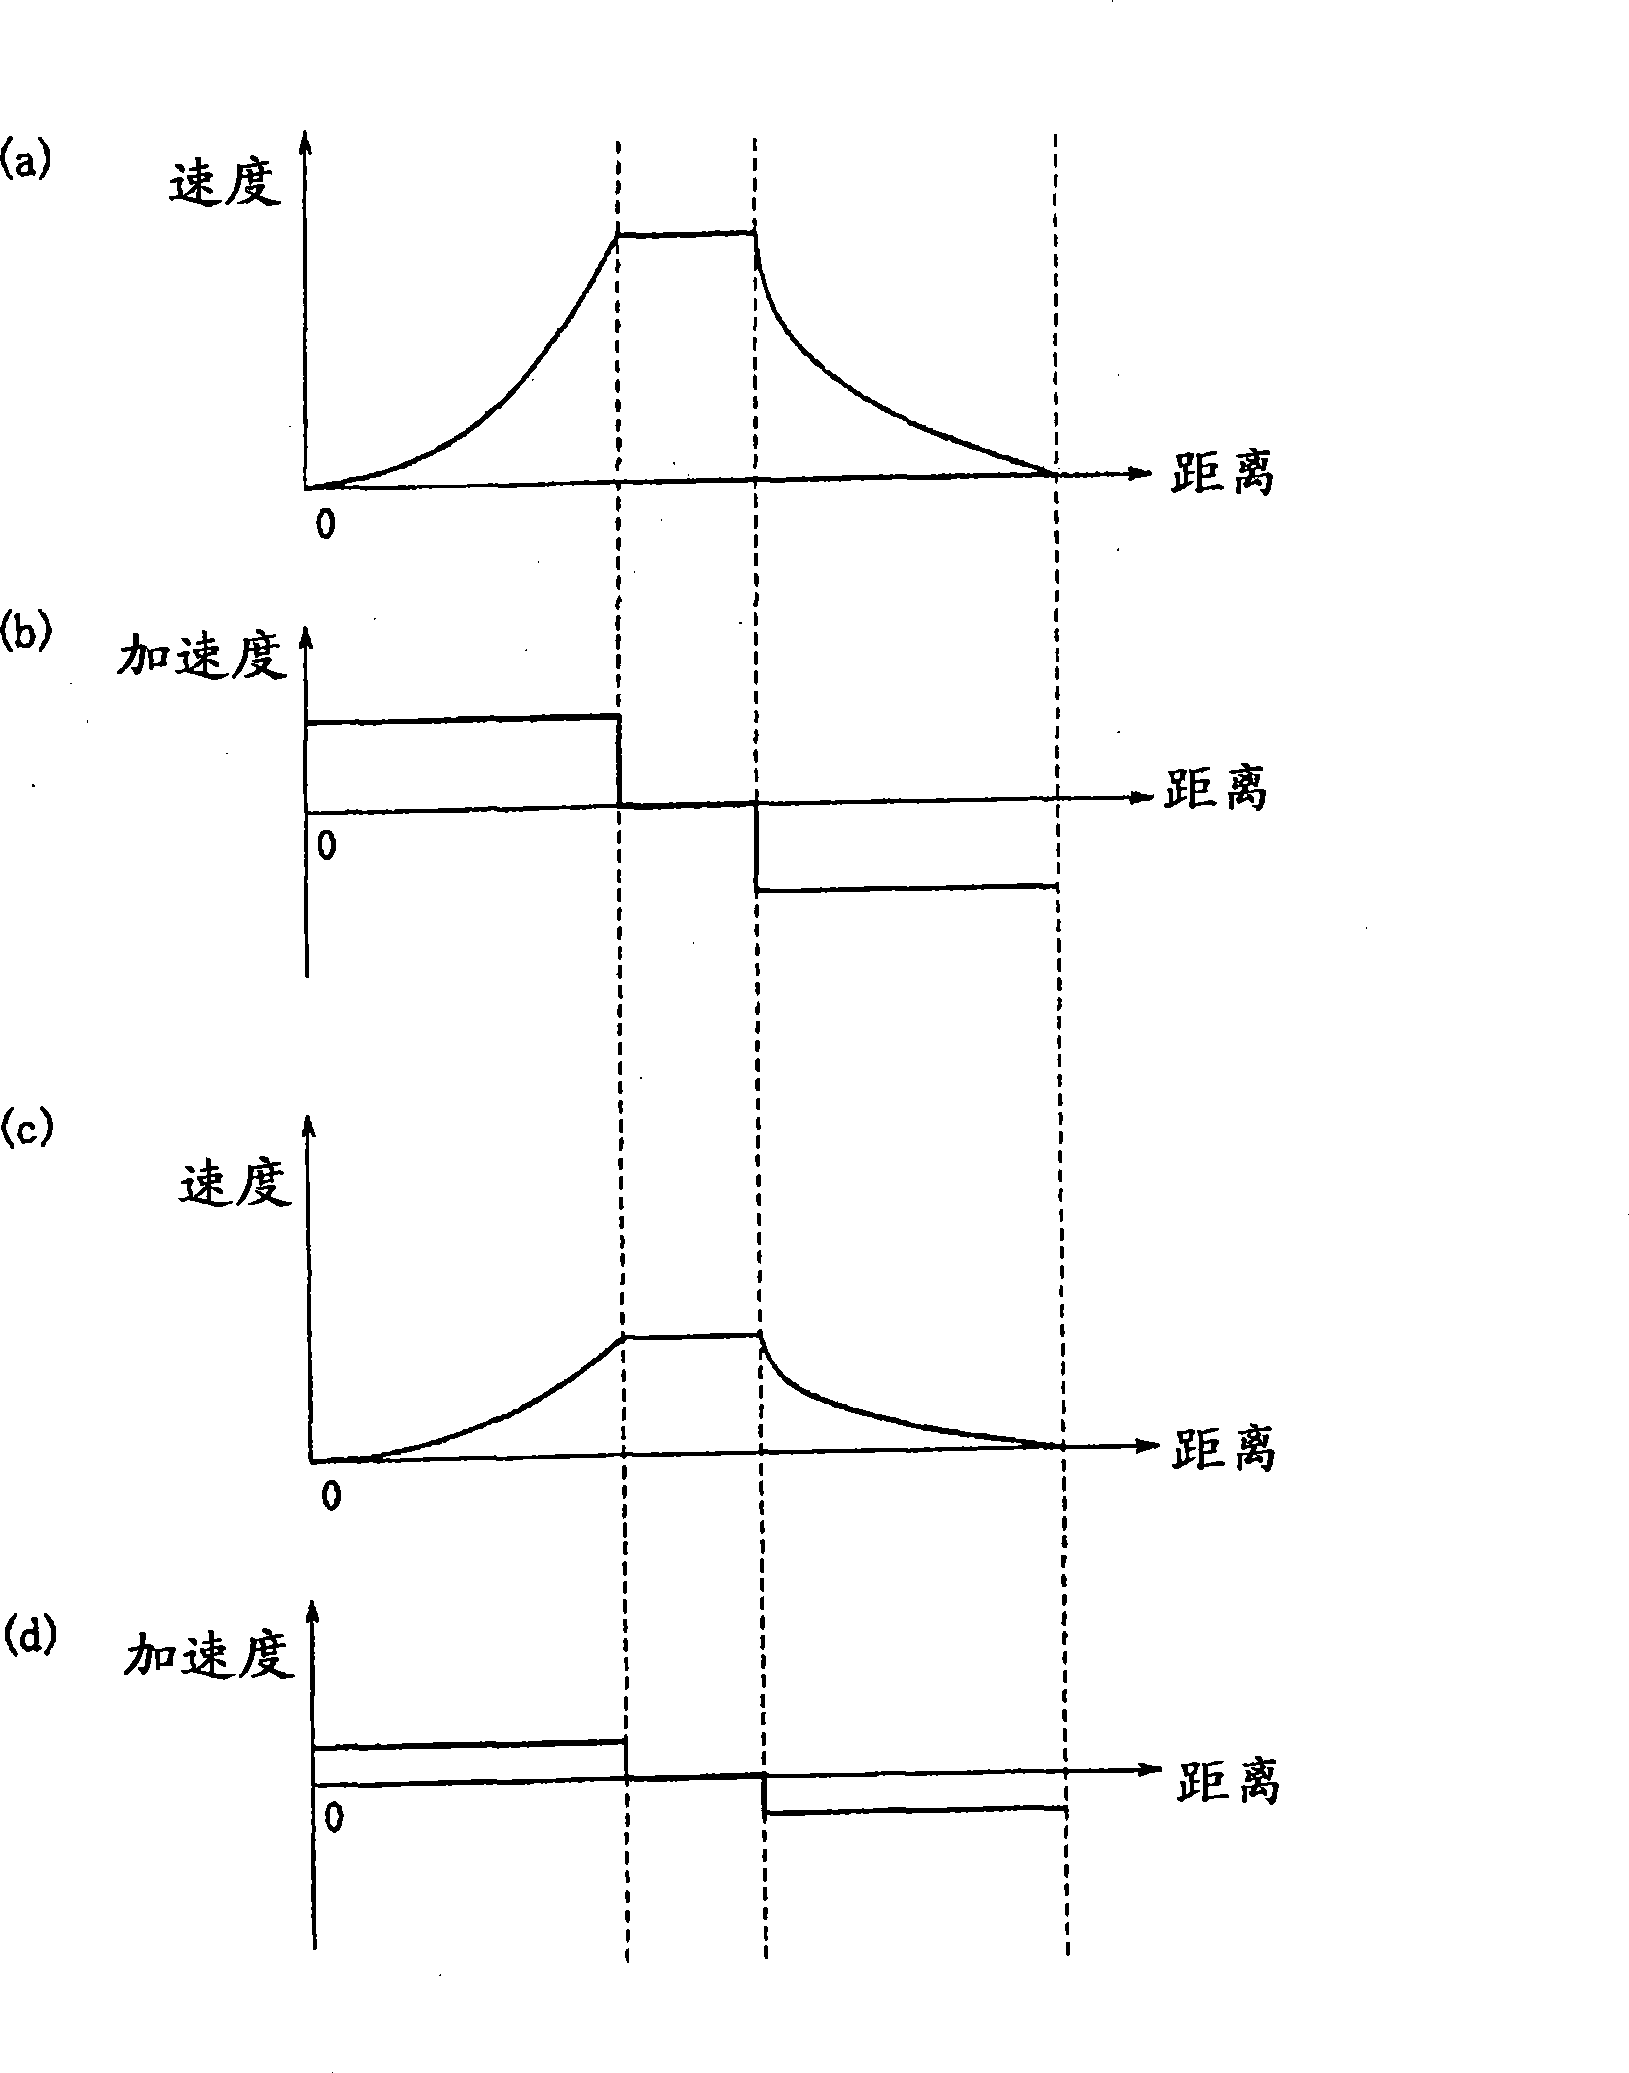 Optical head carrying device, integrated circuit for optical head carrying device, focusing lens driving device and integrated circuit for focusing lens driving device